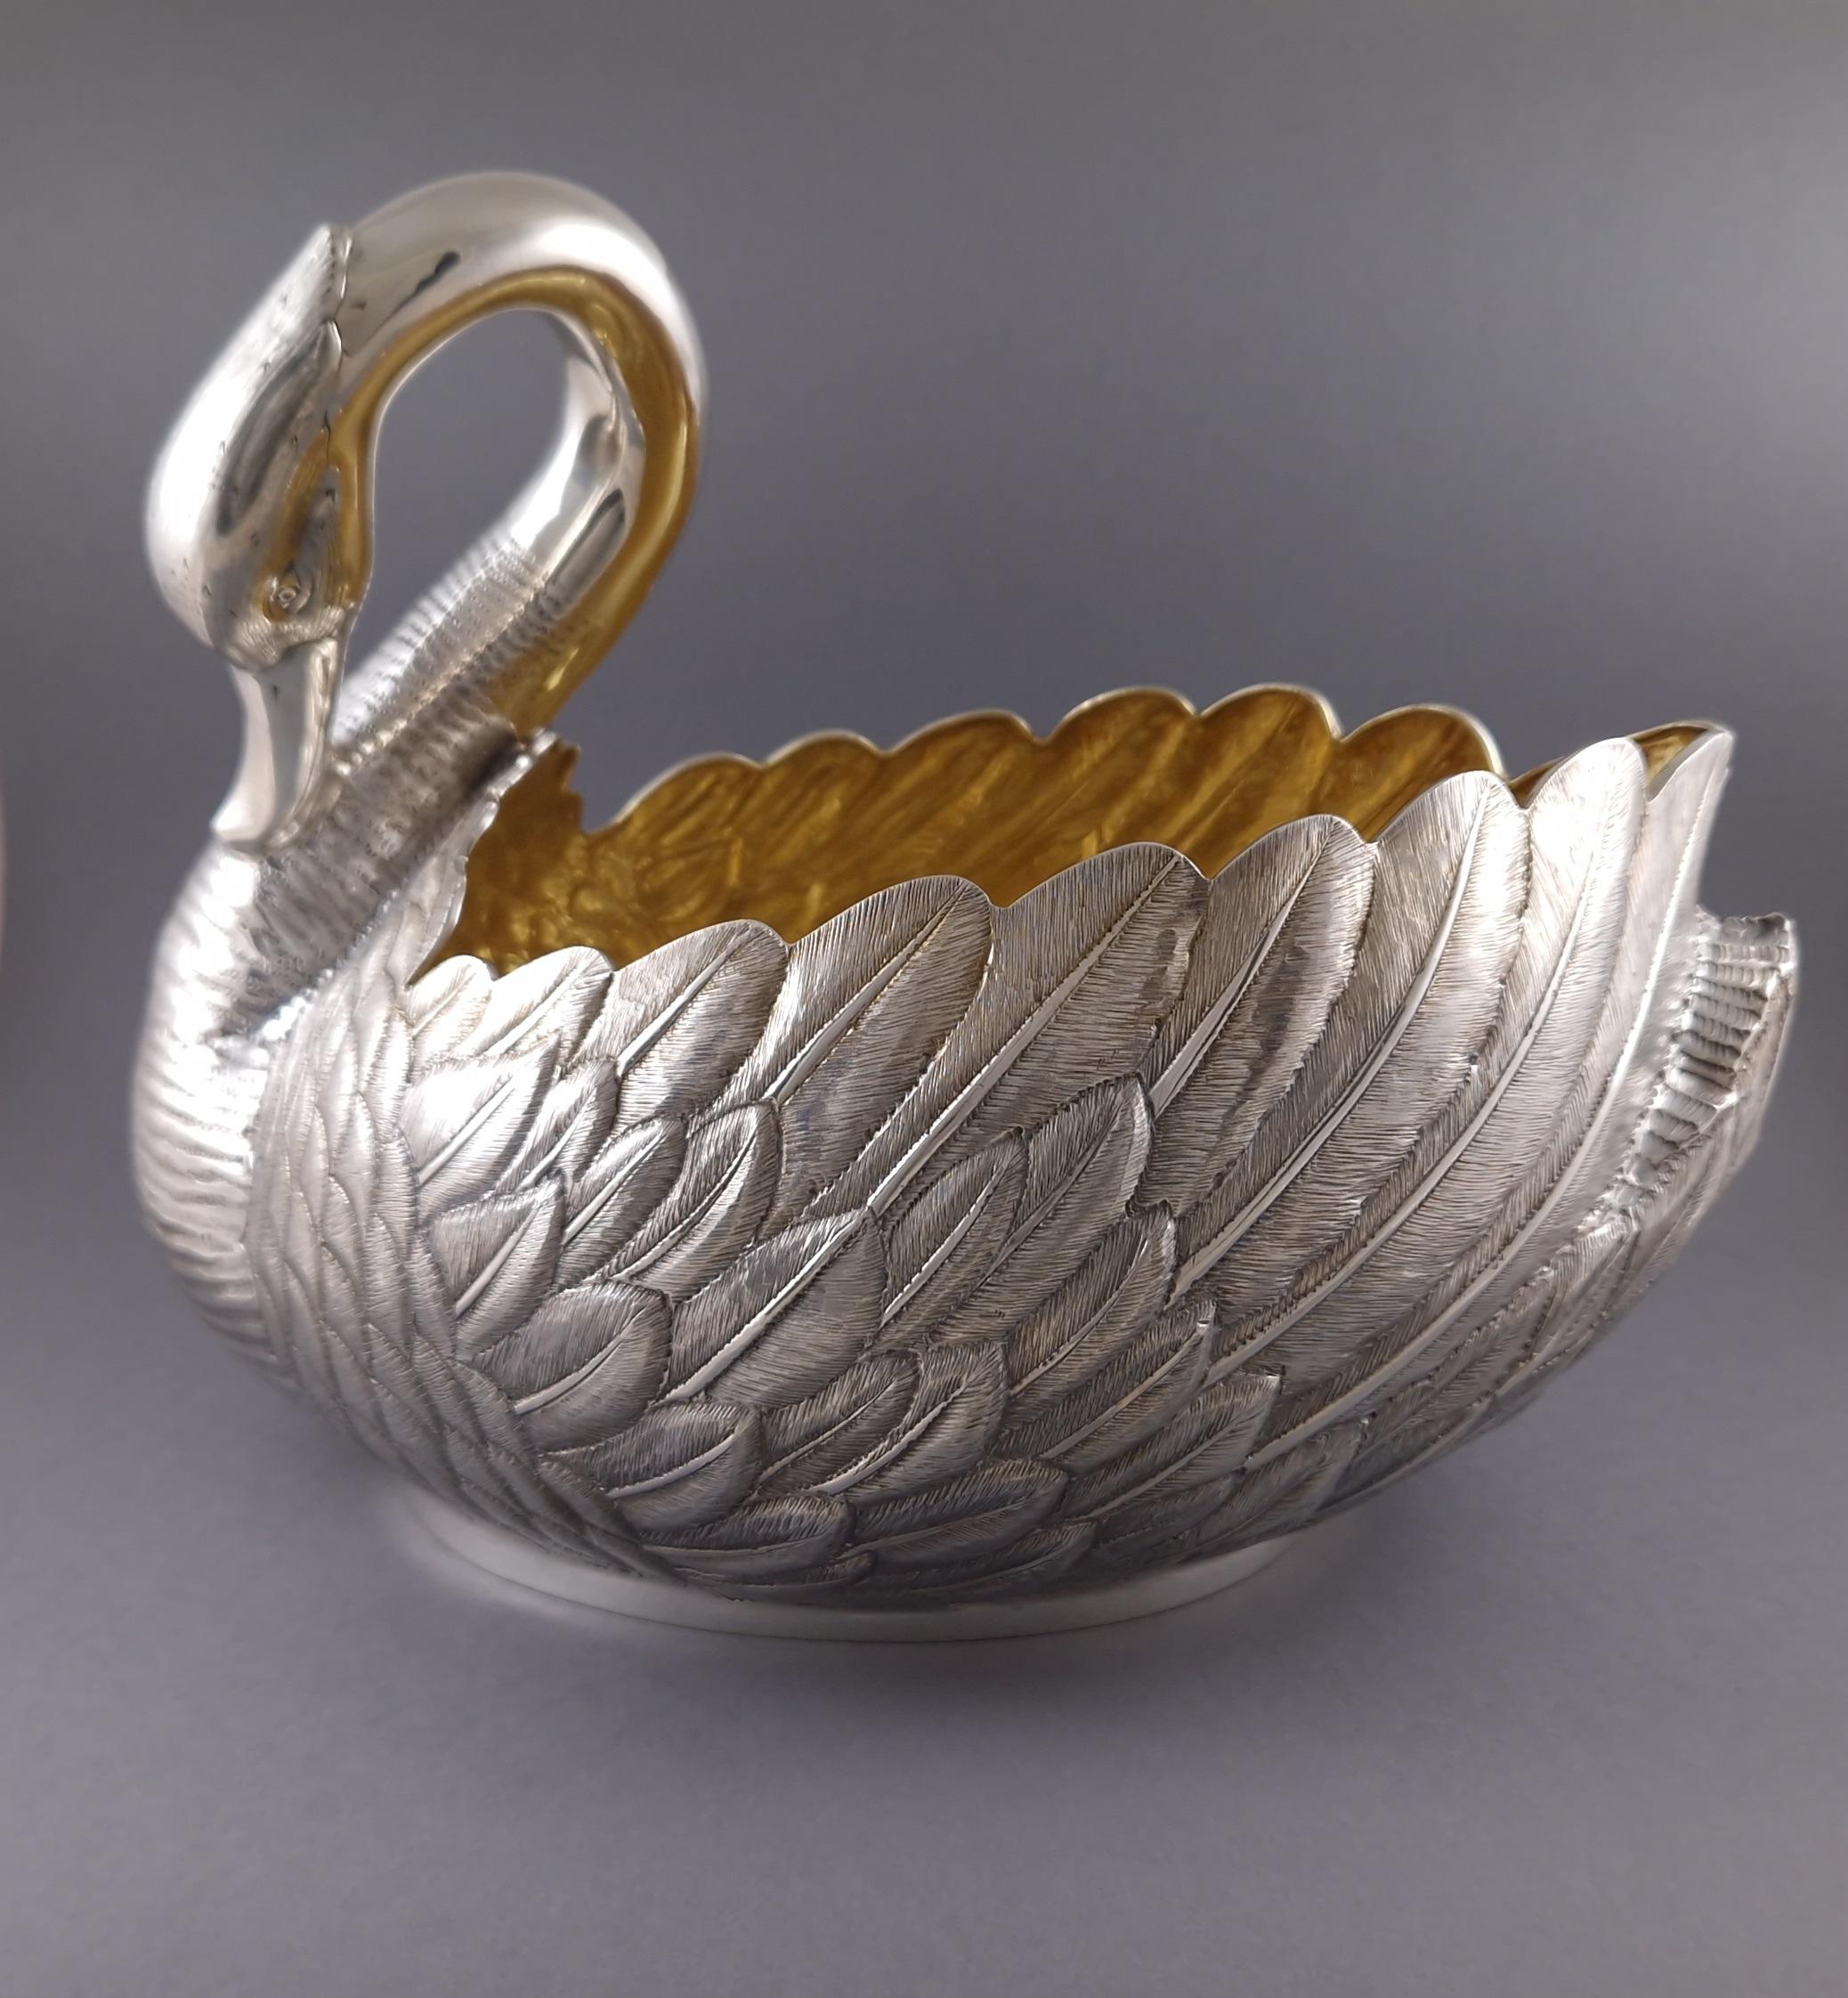 Centerpiece in sterling silver and gilt that can be used as a planter or cooler 
In the shape of a finely chiseled and natural swan 
Italian silver hallmark 800 
Length: 32 cm 
Width: 21 cm 
Height: 25 cm 
Weight: 1585 grams